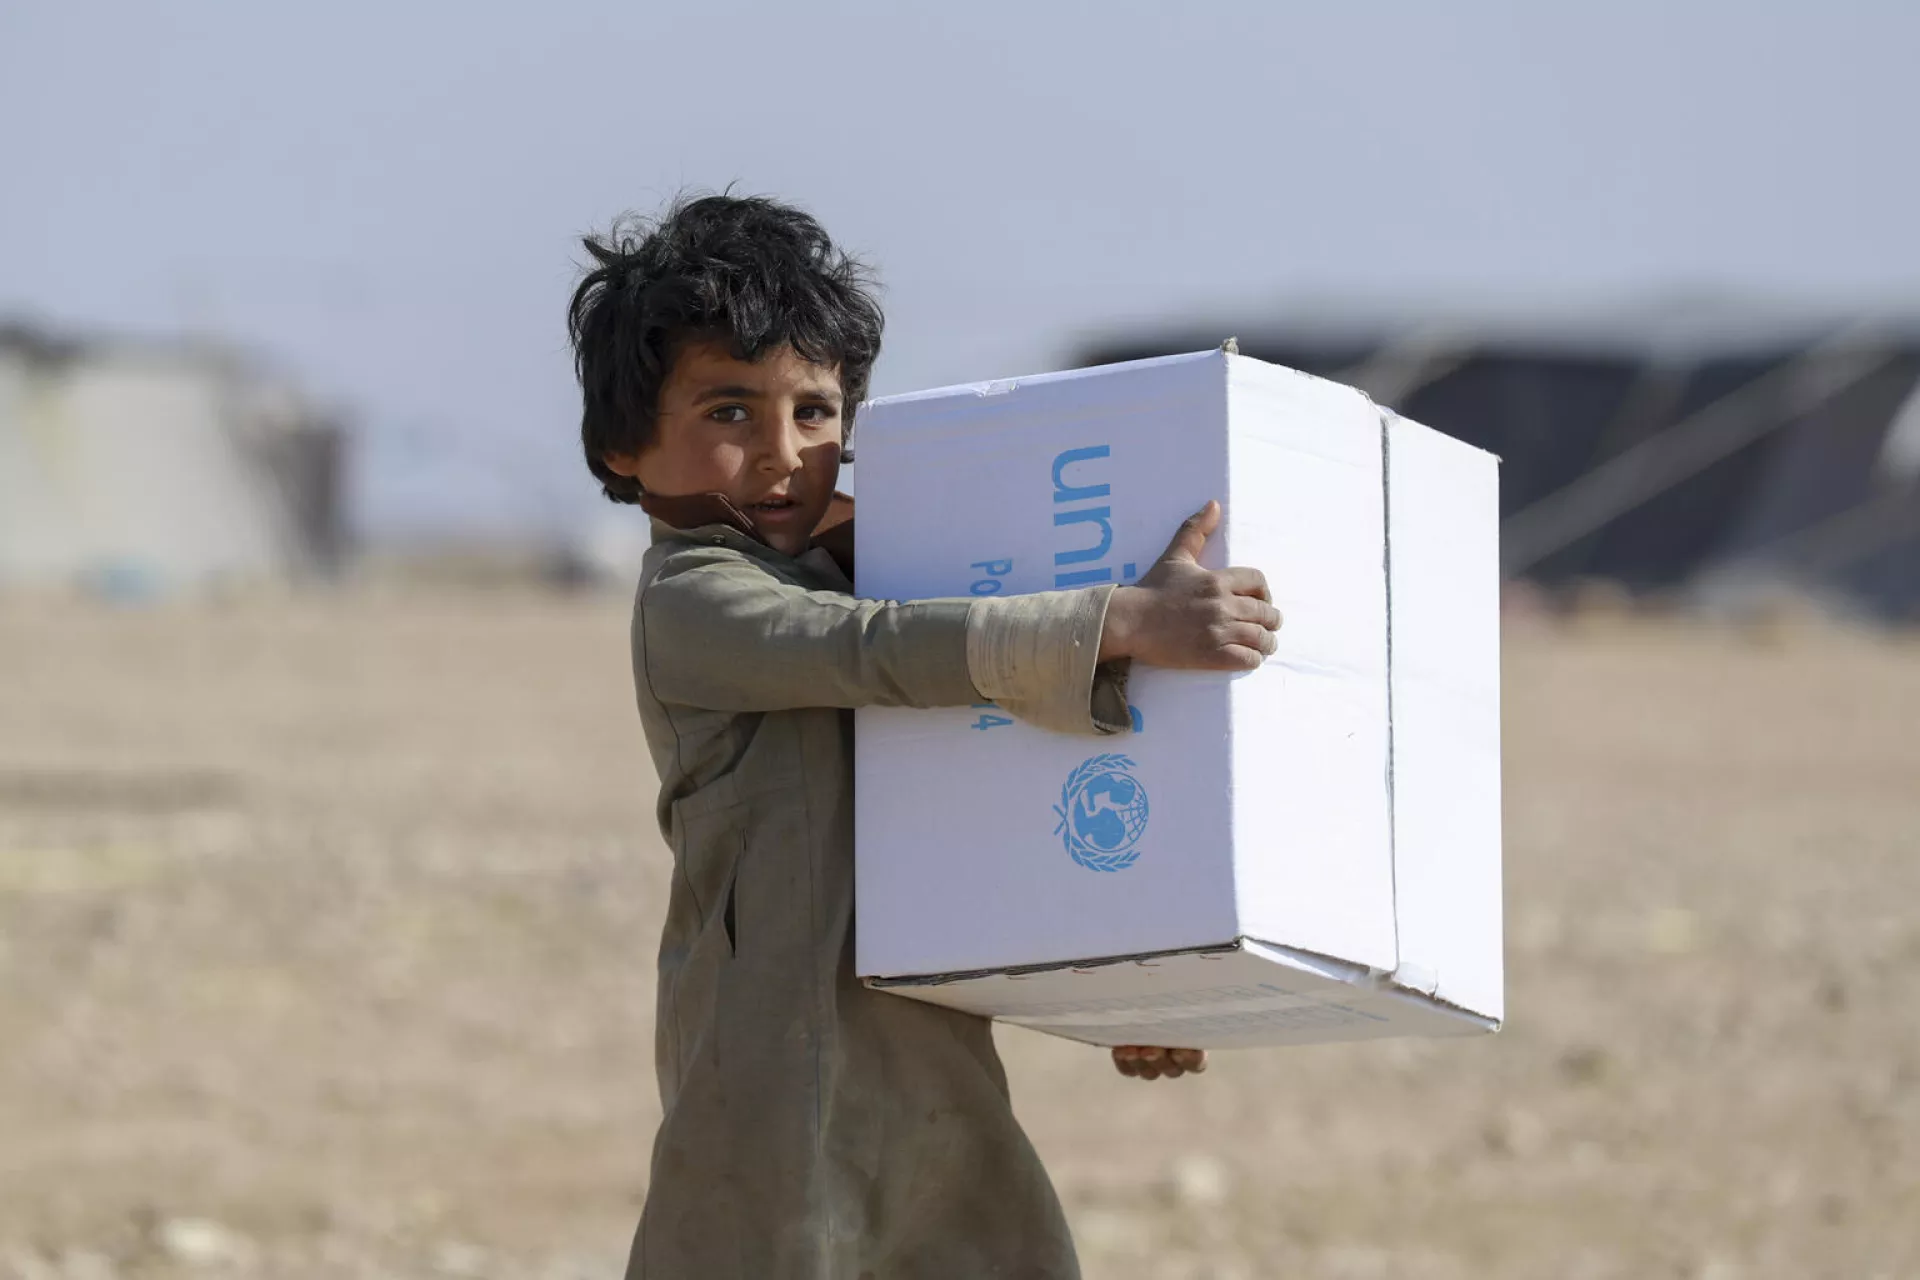 Syria. An internally child carries a box of UNICEF-provided supplies.